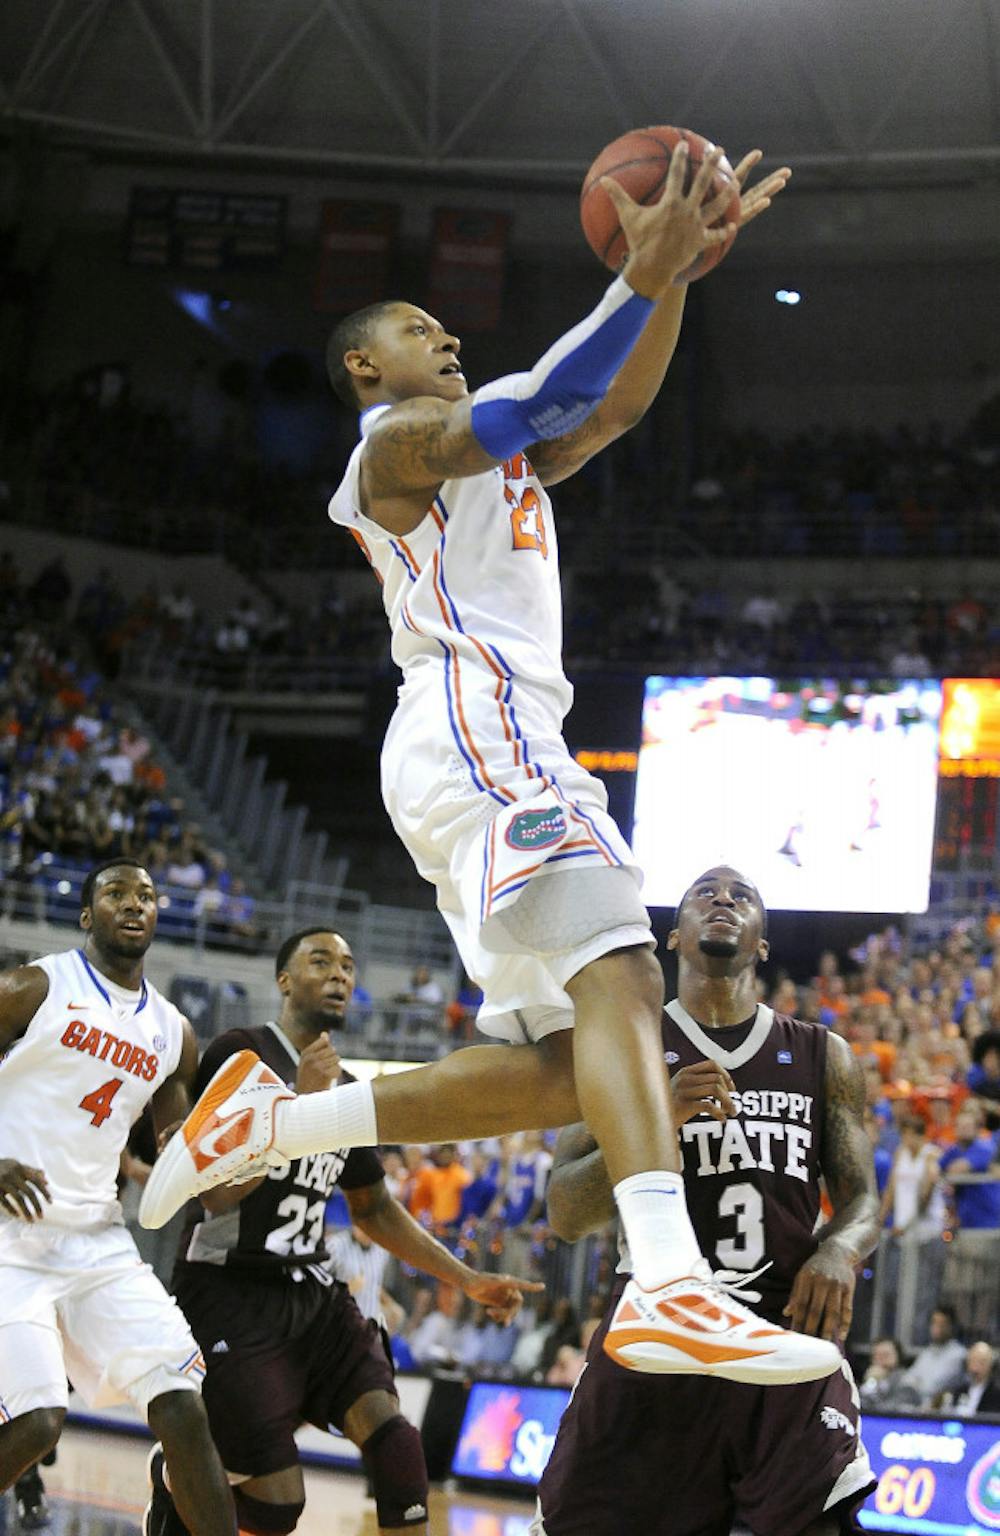 <p>Florida guard Brad Beal declared for the NBA Draft on Monday after a stellar freshman campaign in which he led the Gators in minutes played and rebounding. Beal is projected to be a lottery pick in the June 28 draft.</p>